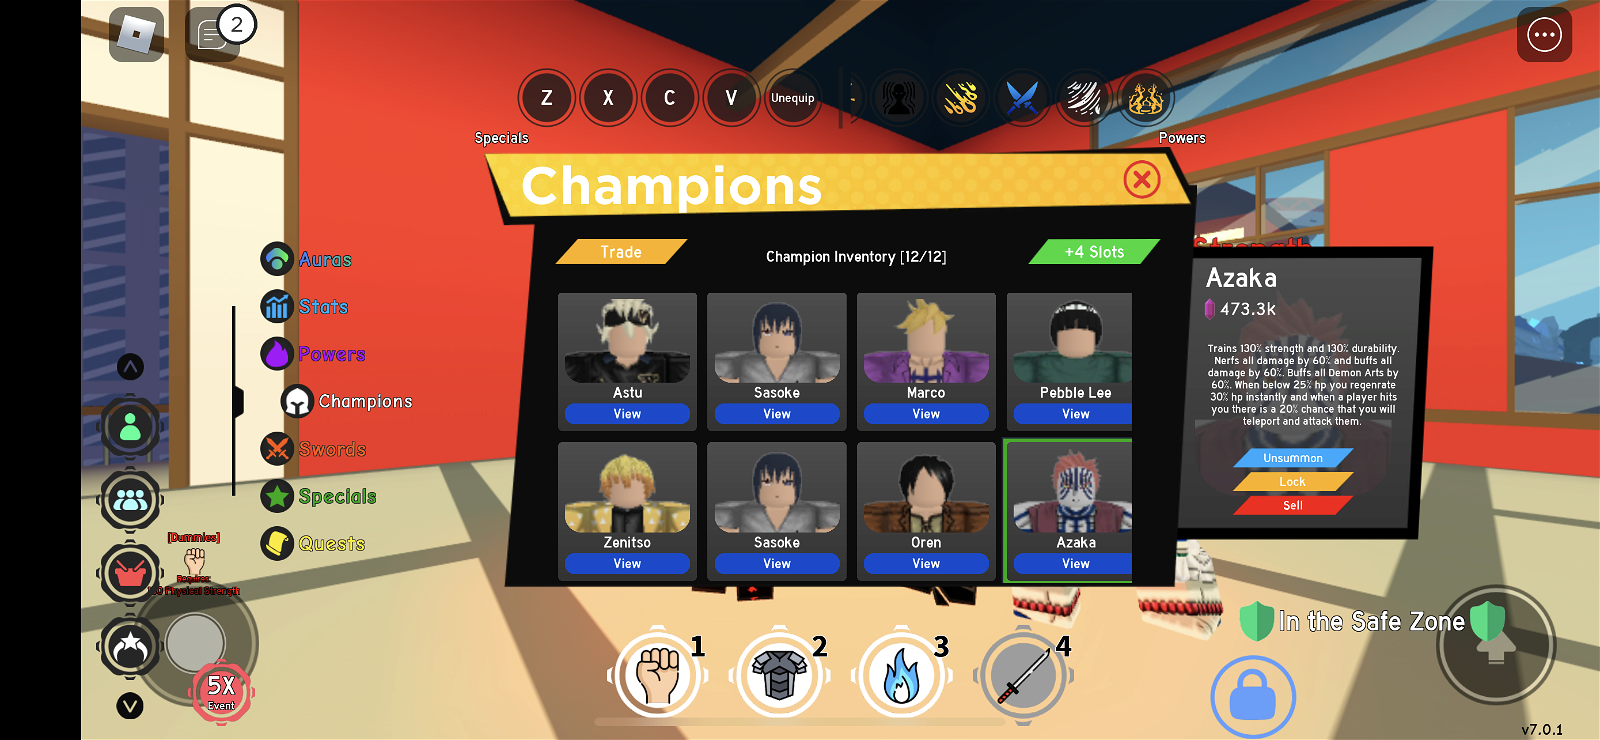 SOLD - OP Anime Fighters Simulator Account with all gamepasses [2800+hrs]  play time - EpicNPC